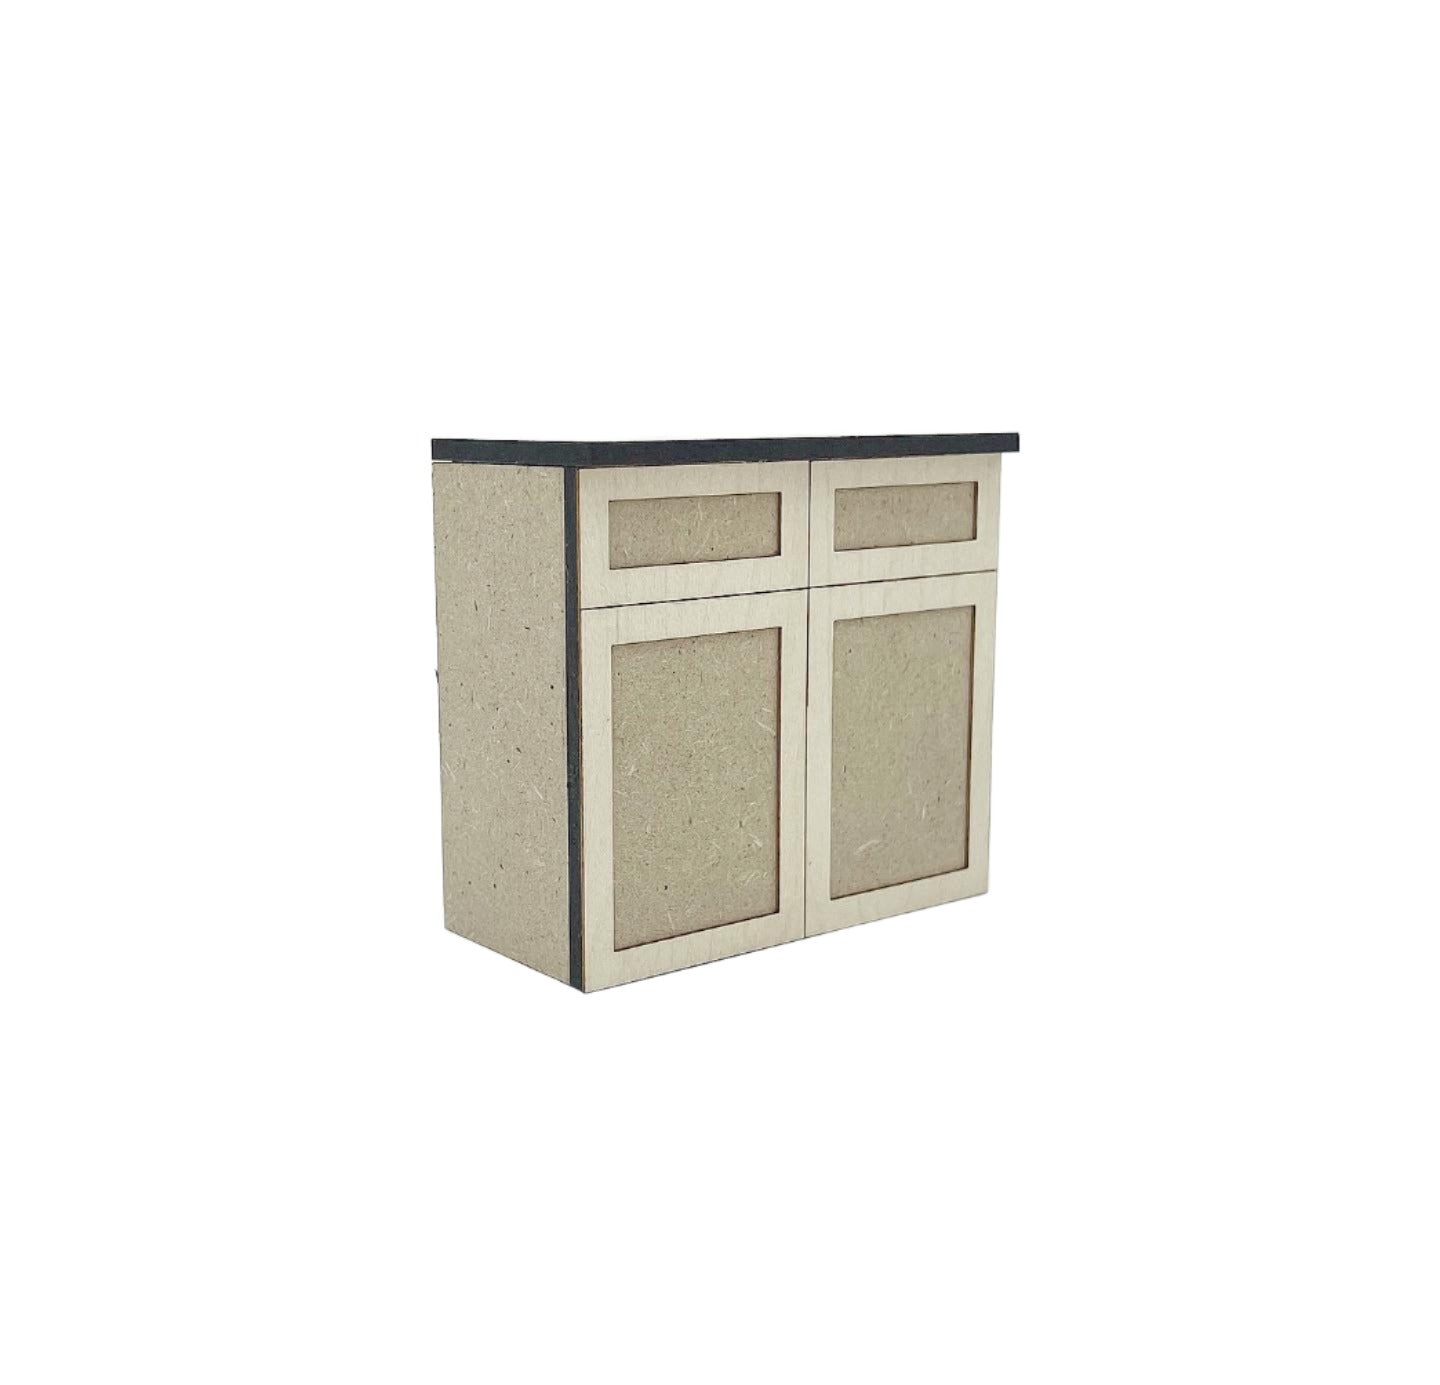 Double Lower Cabinet with Doors, Shaker